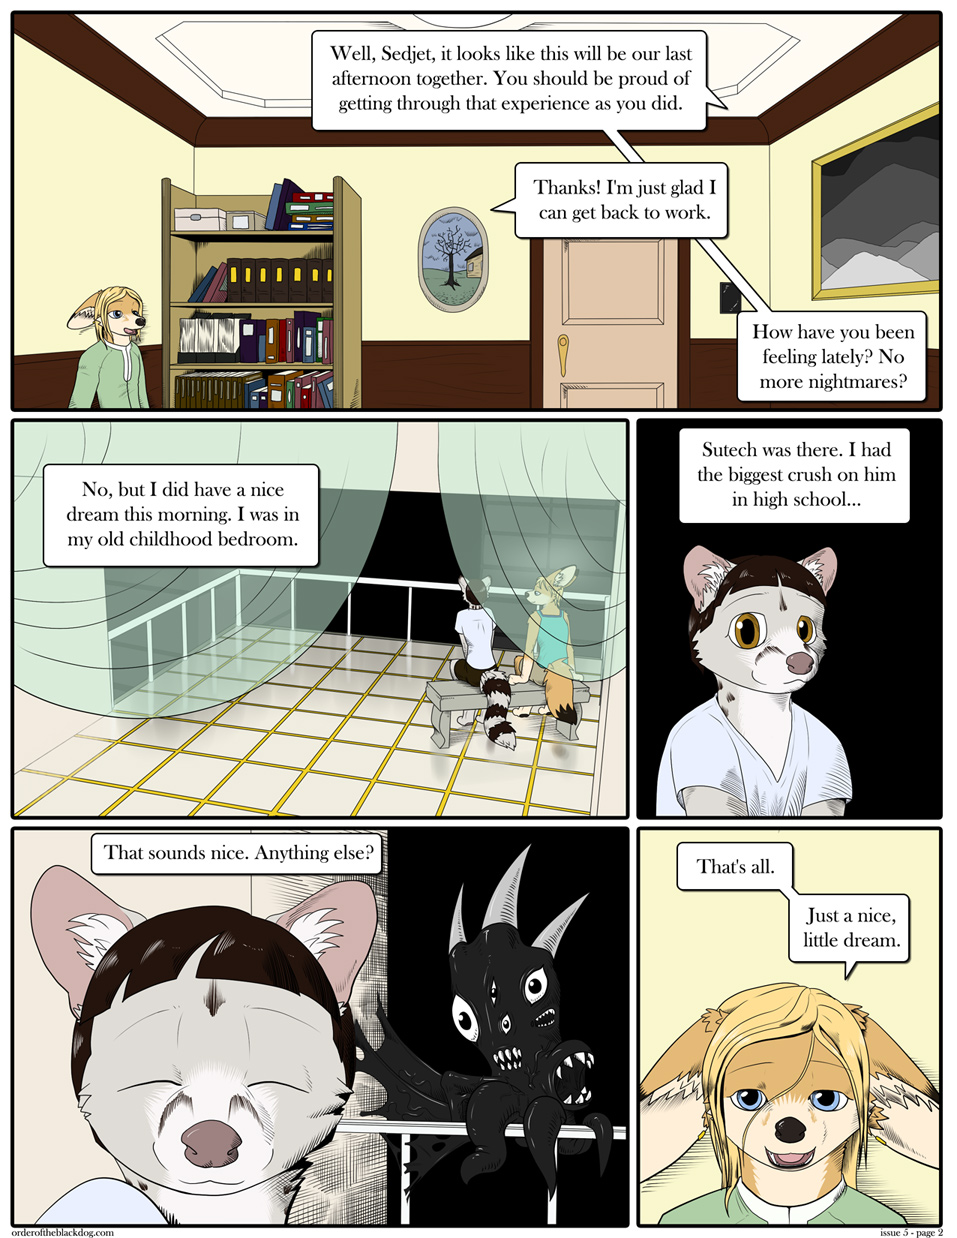 Issue 5, Page 2